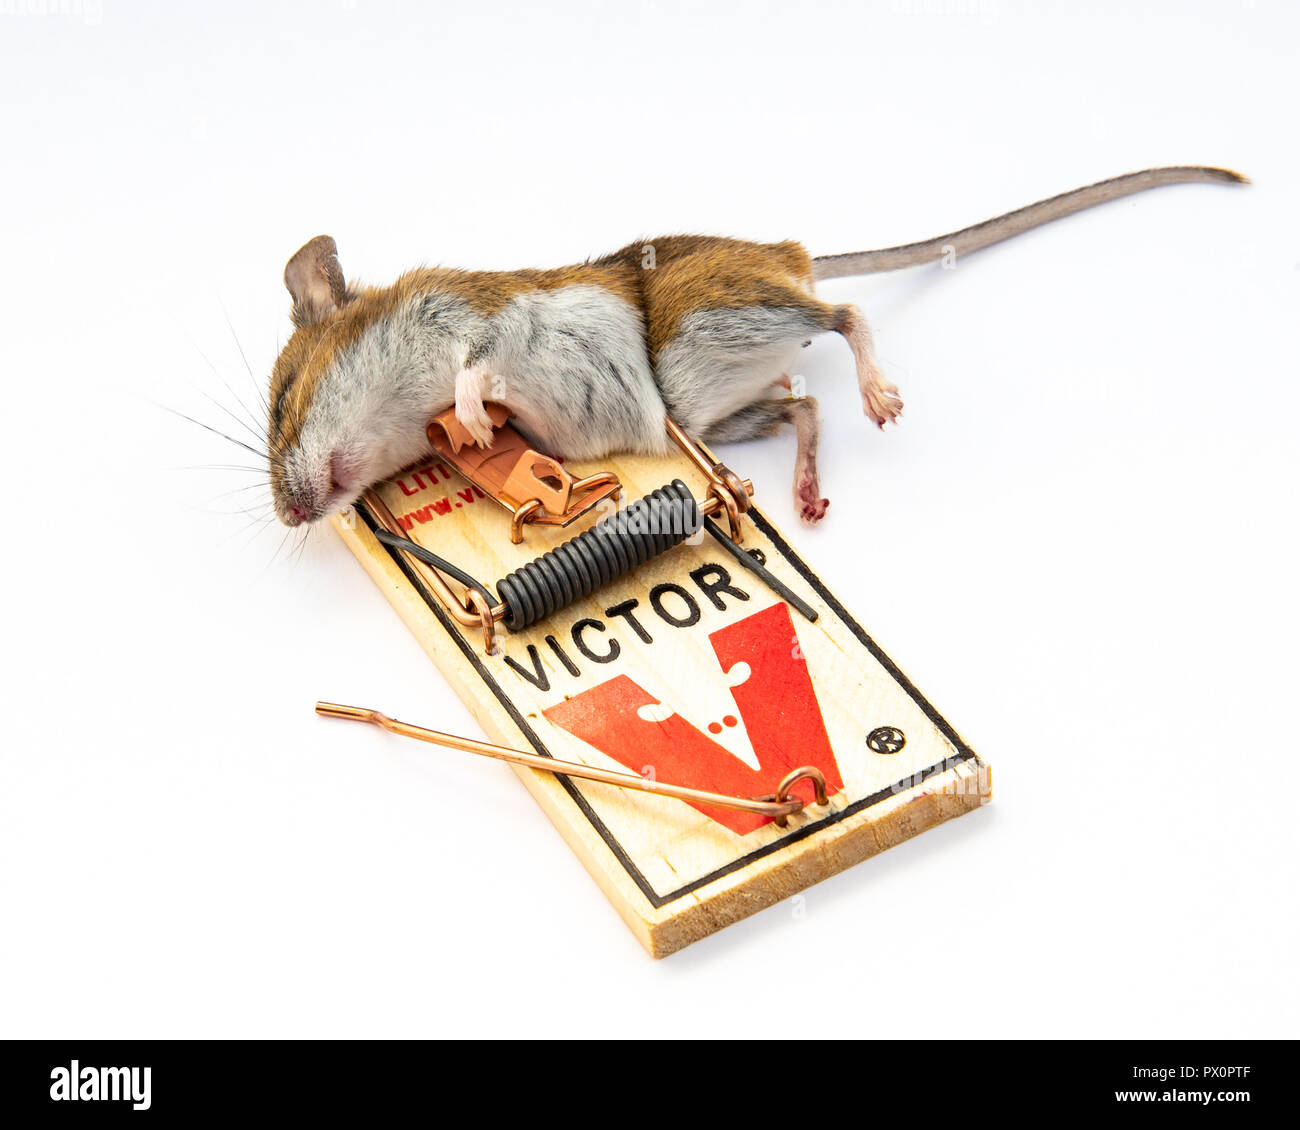 Image Of Mouse Trap Pest Control For Small Brown House Mouse Rodent Shown  Dead On In Plastic Mouse Trap After Being Humanely Killed With Broken Neck  Red And White Plastic Reusable Spring